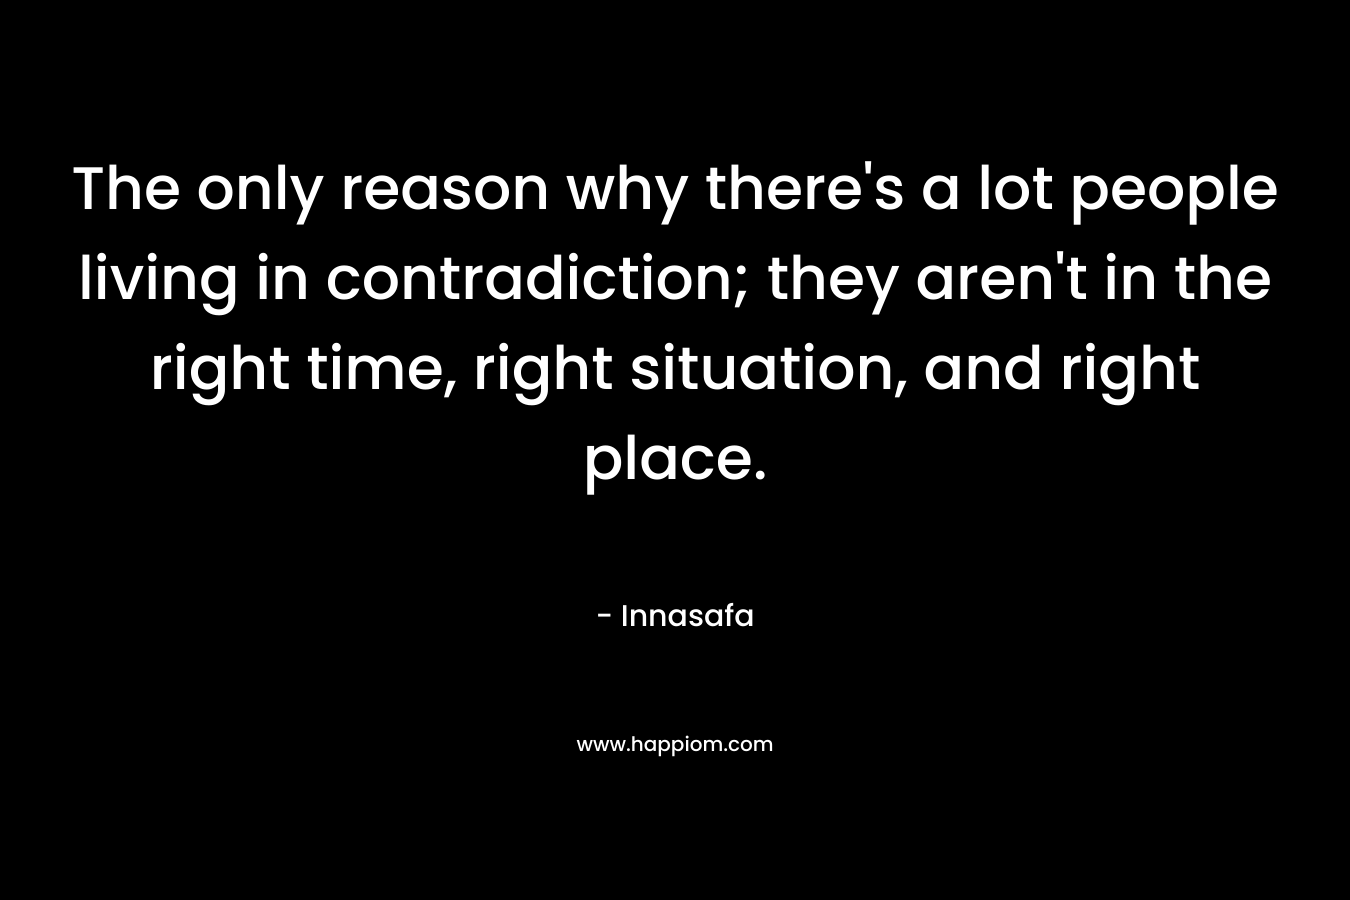 The only reason why there's a lot people living in contradiction; they aren't in the right time, right situation, and right place.